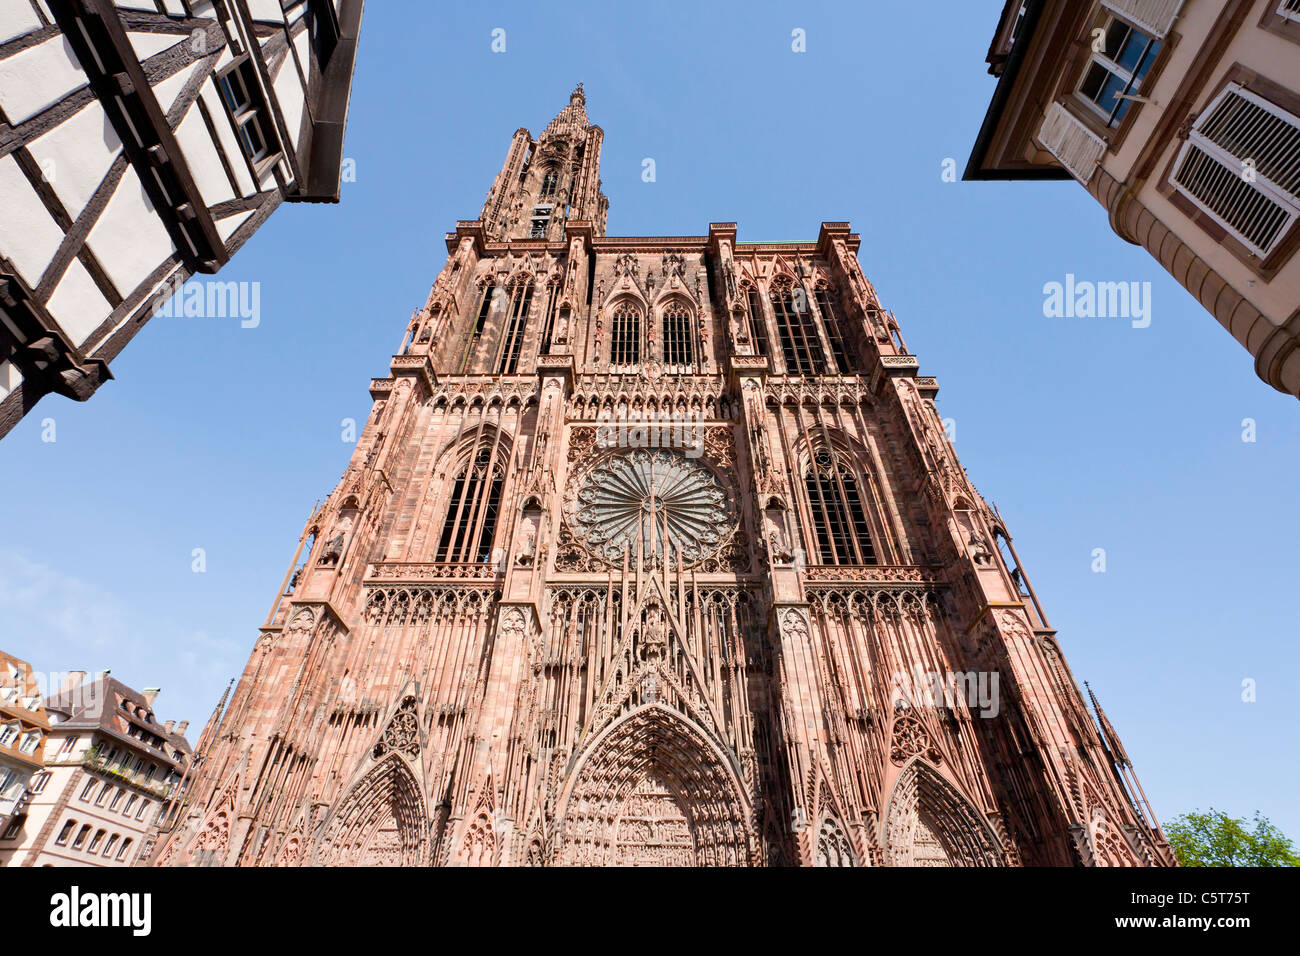 France, Alsace, Strasbourg, View of Notre Dame cathedral with frame houses Stock Photo